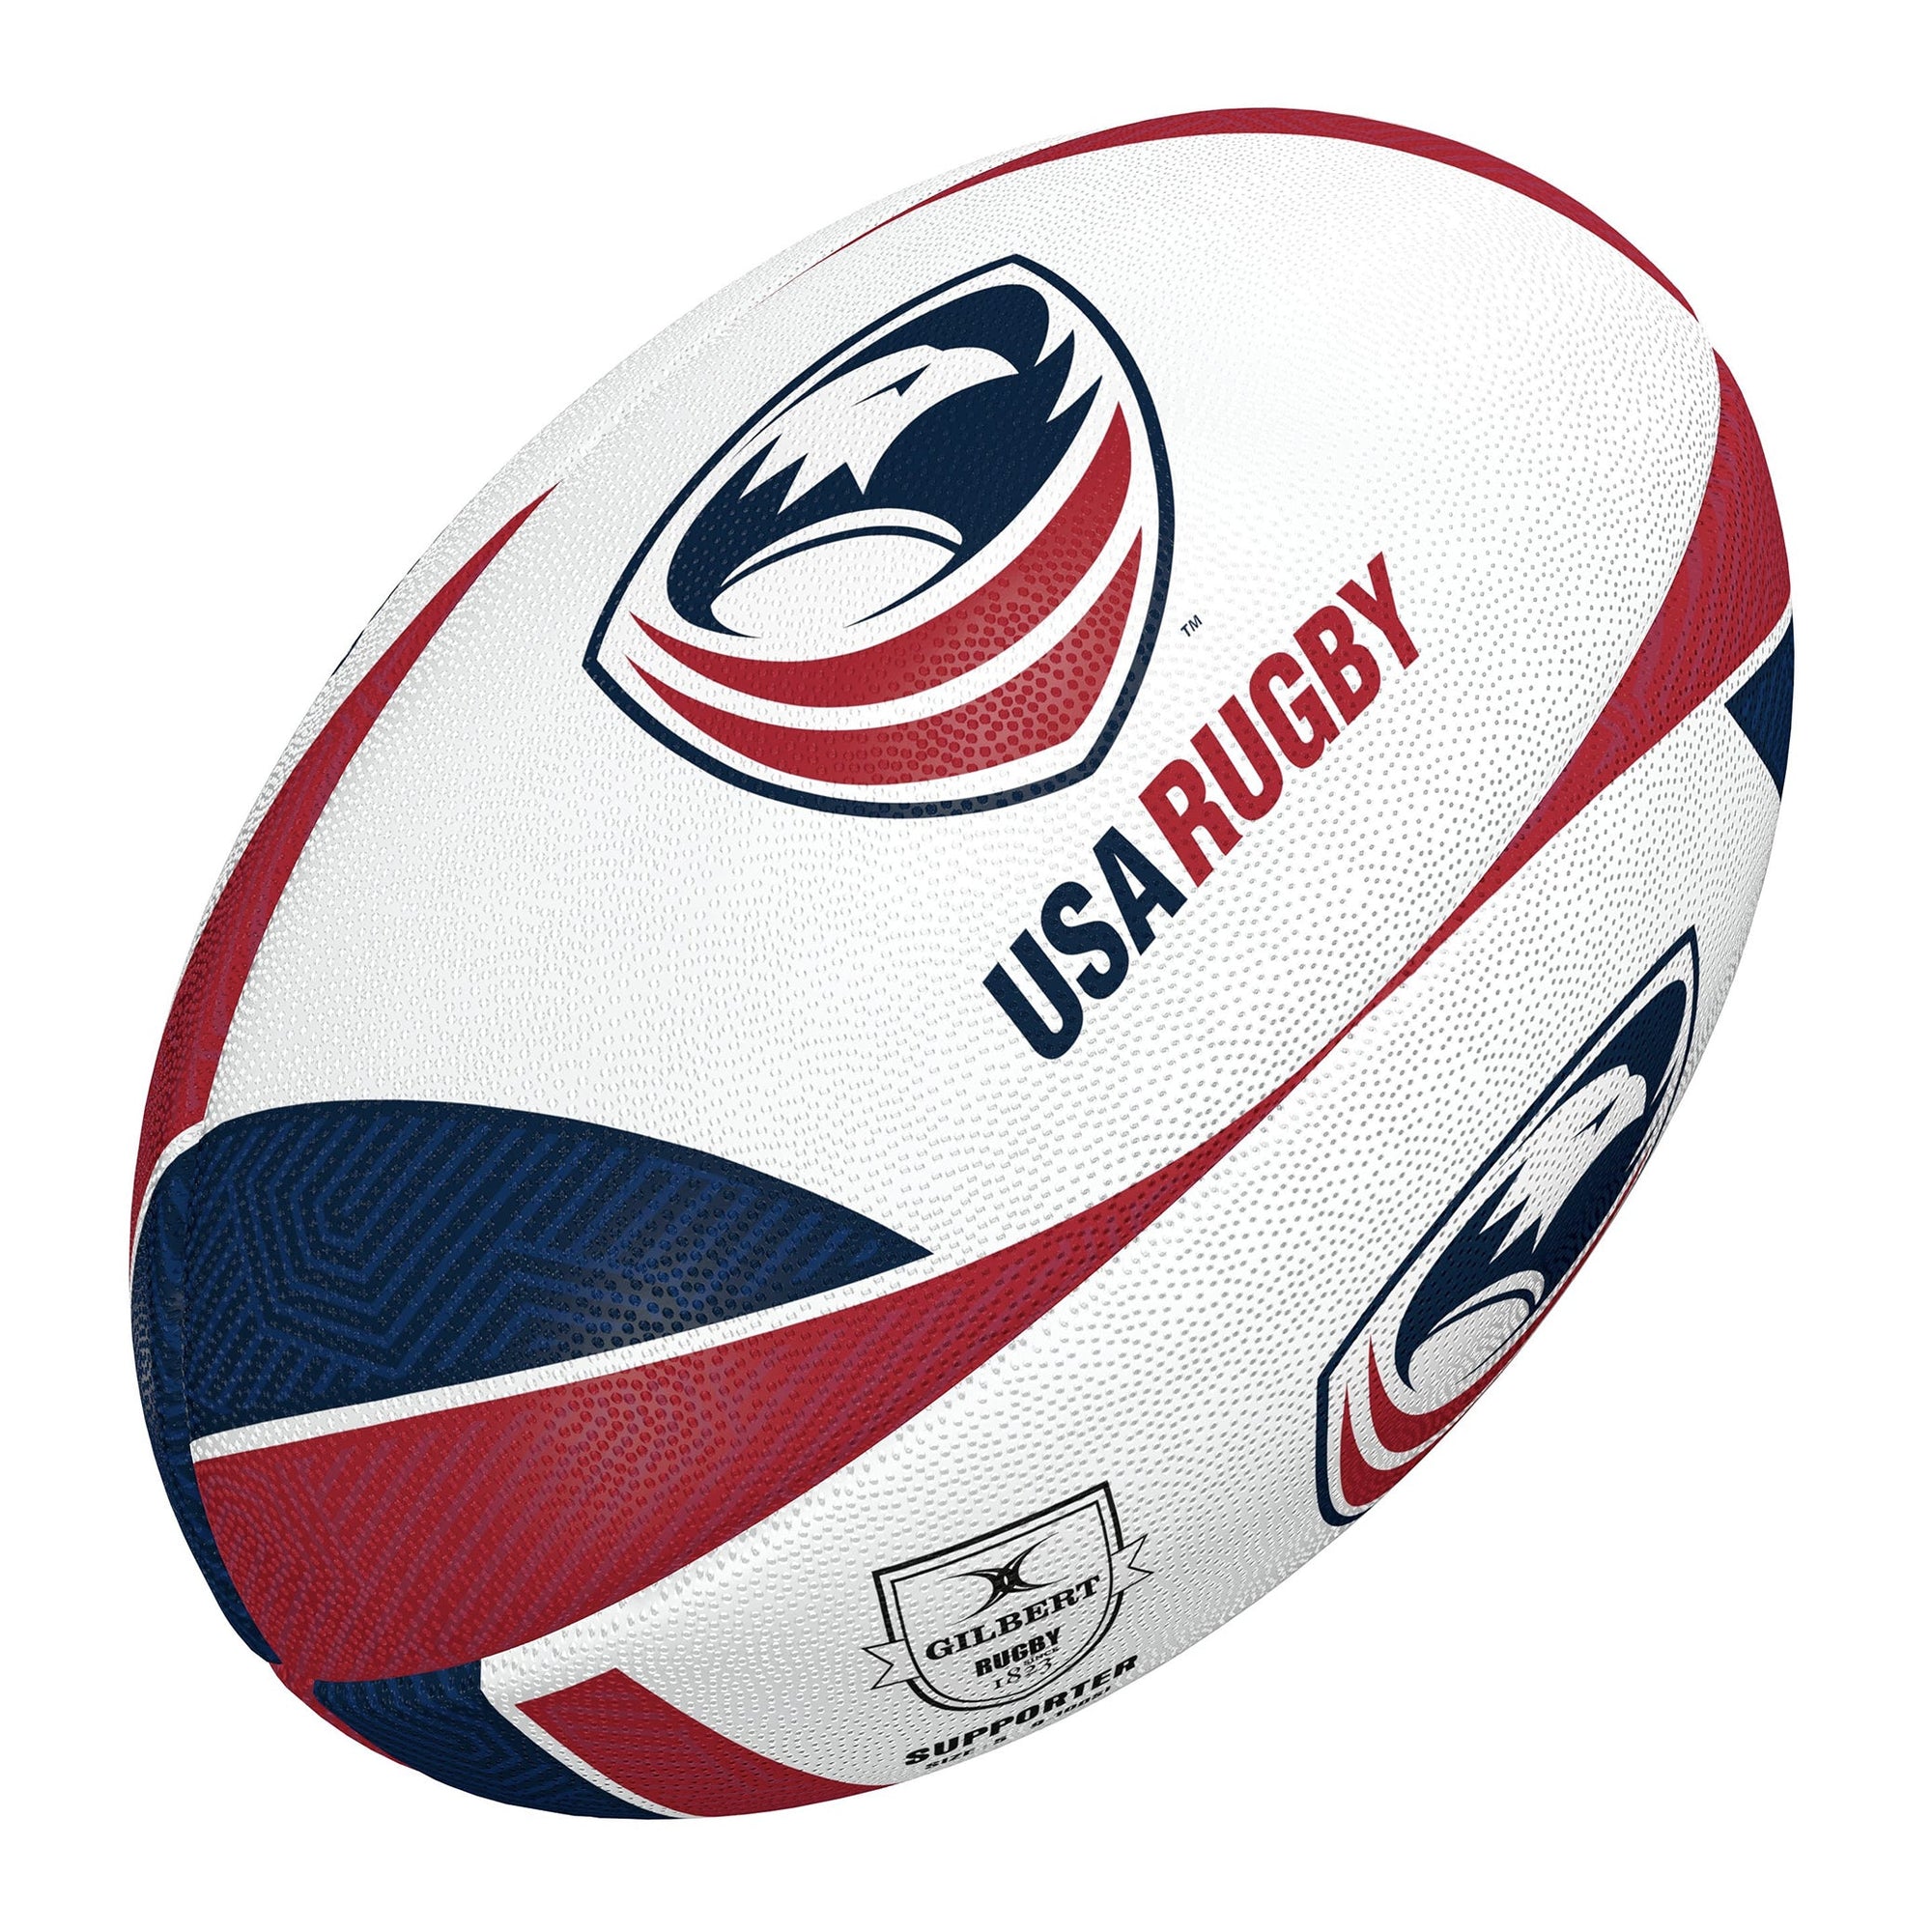 Rugby Imports Gilbert USA Rugby Supporter Ball